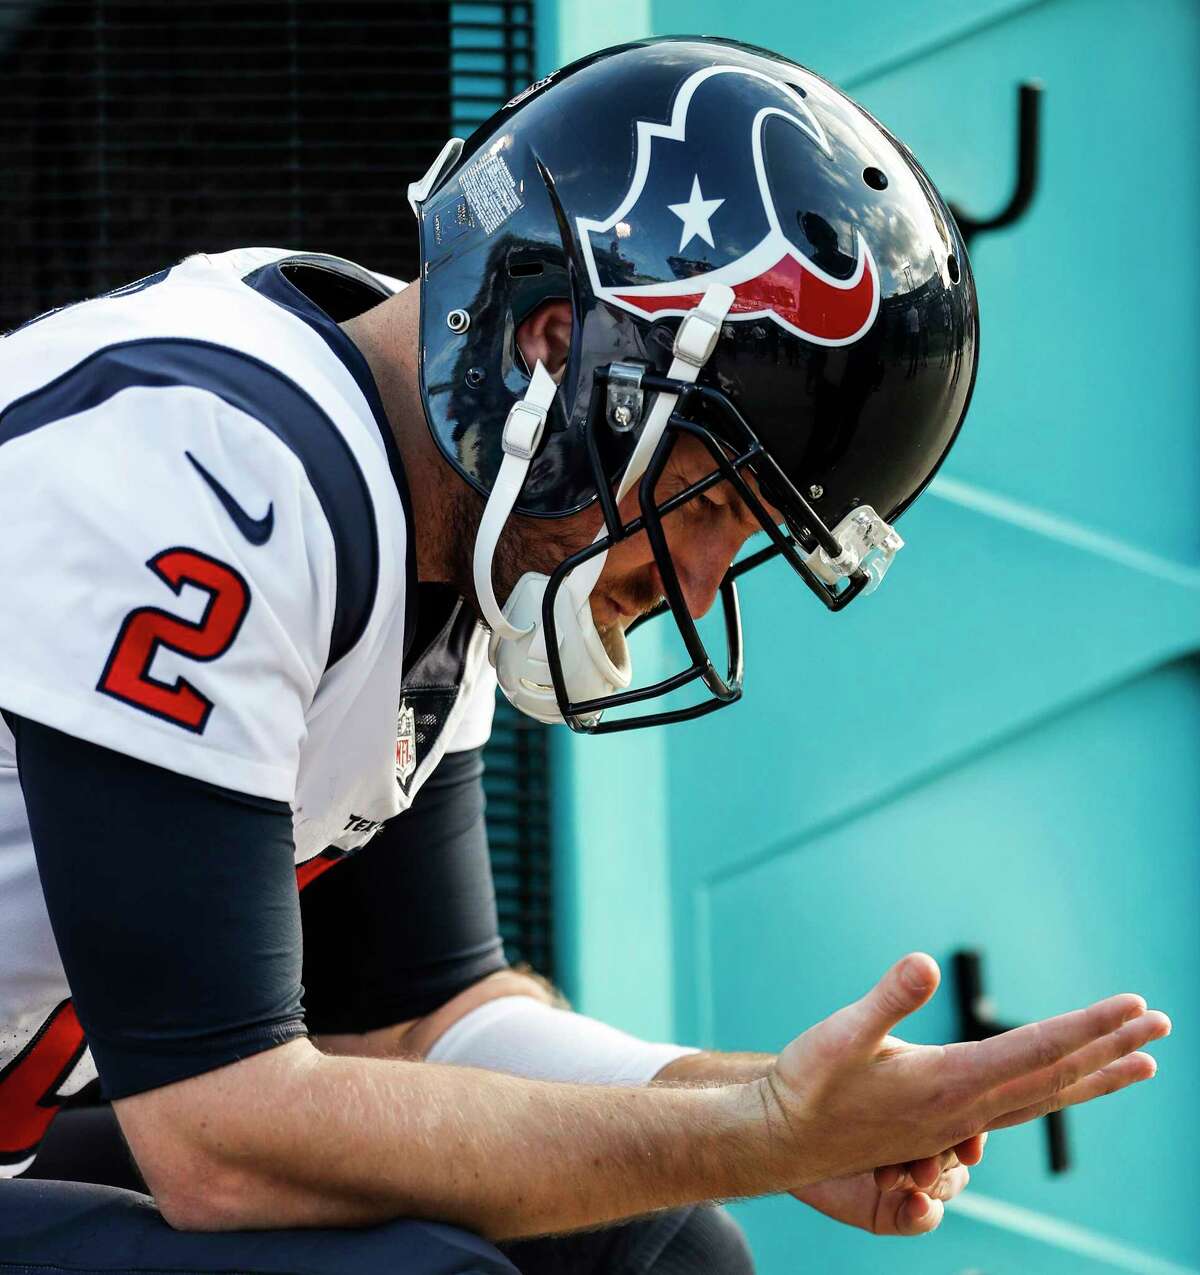 Houston Texans quarterback T.J. Yates (2) sits on the bench during the fourth quarter of the Texans 45-7 loss to the Jacksonville Jaguars during the fourth quarter of an NFL football game at EverBank Field on Sunday, Dec. 17, 2017, in Jacksonville.